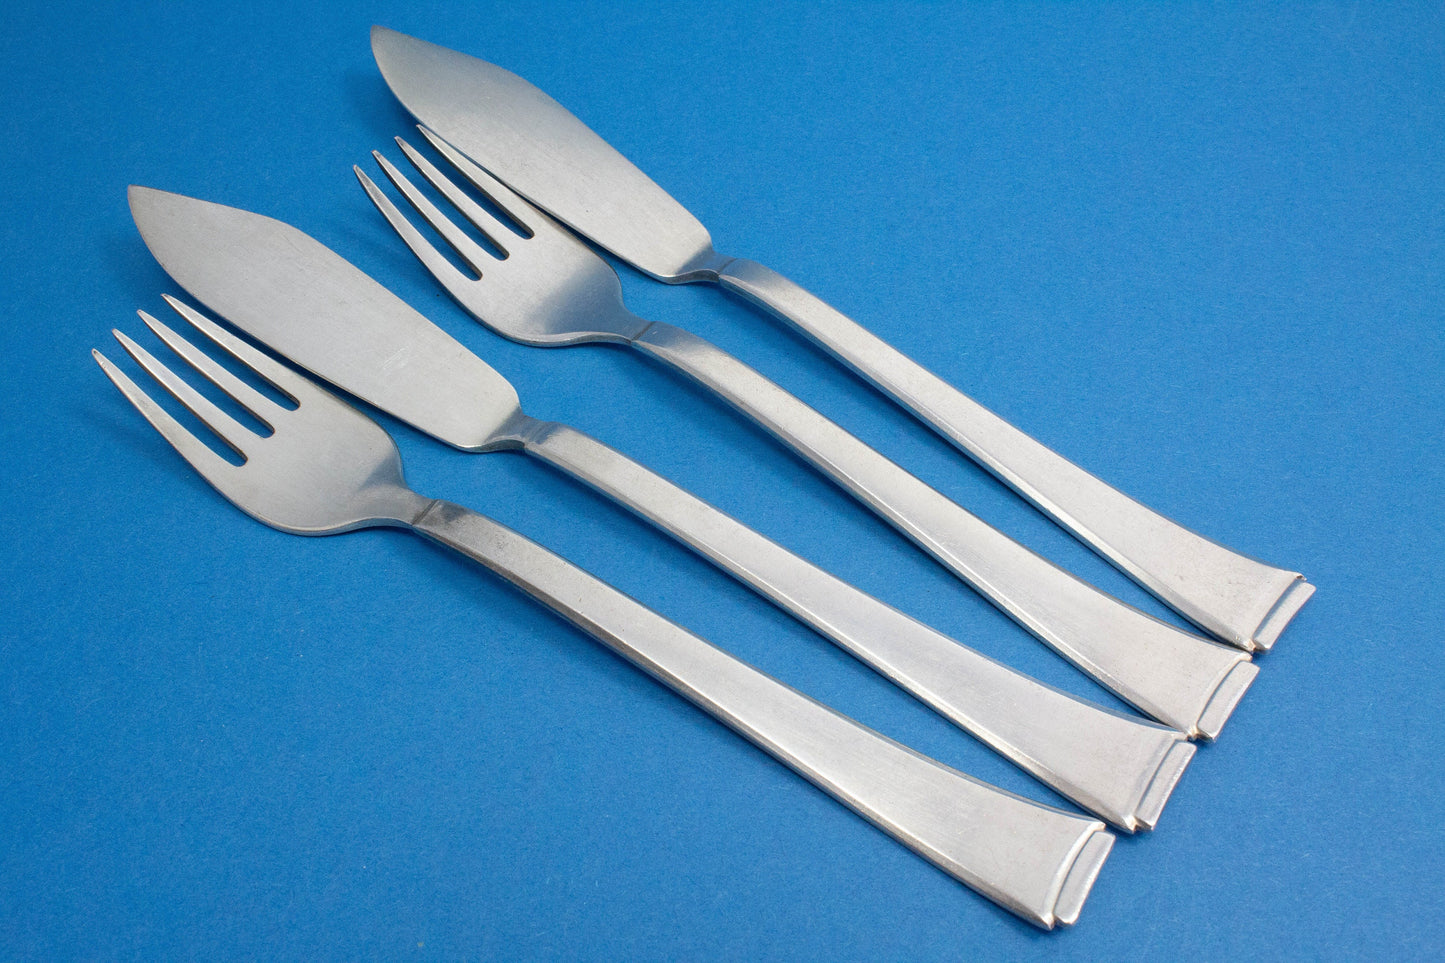 Fish cutlery for 2 people, candle light dinner, WMF 2500